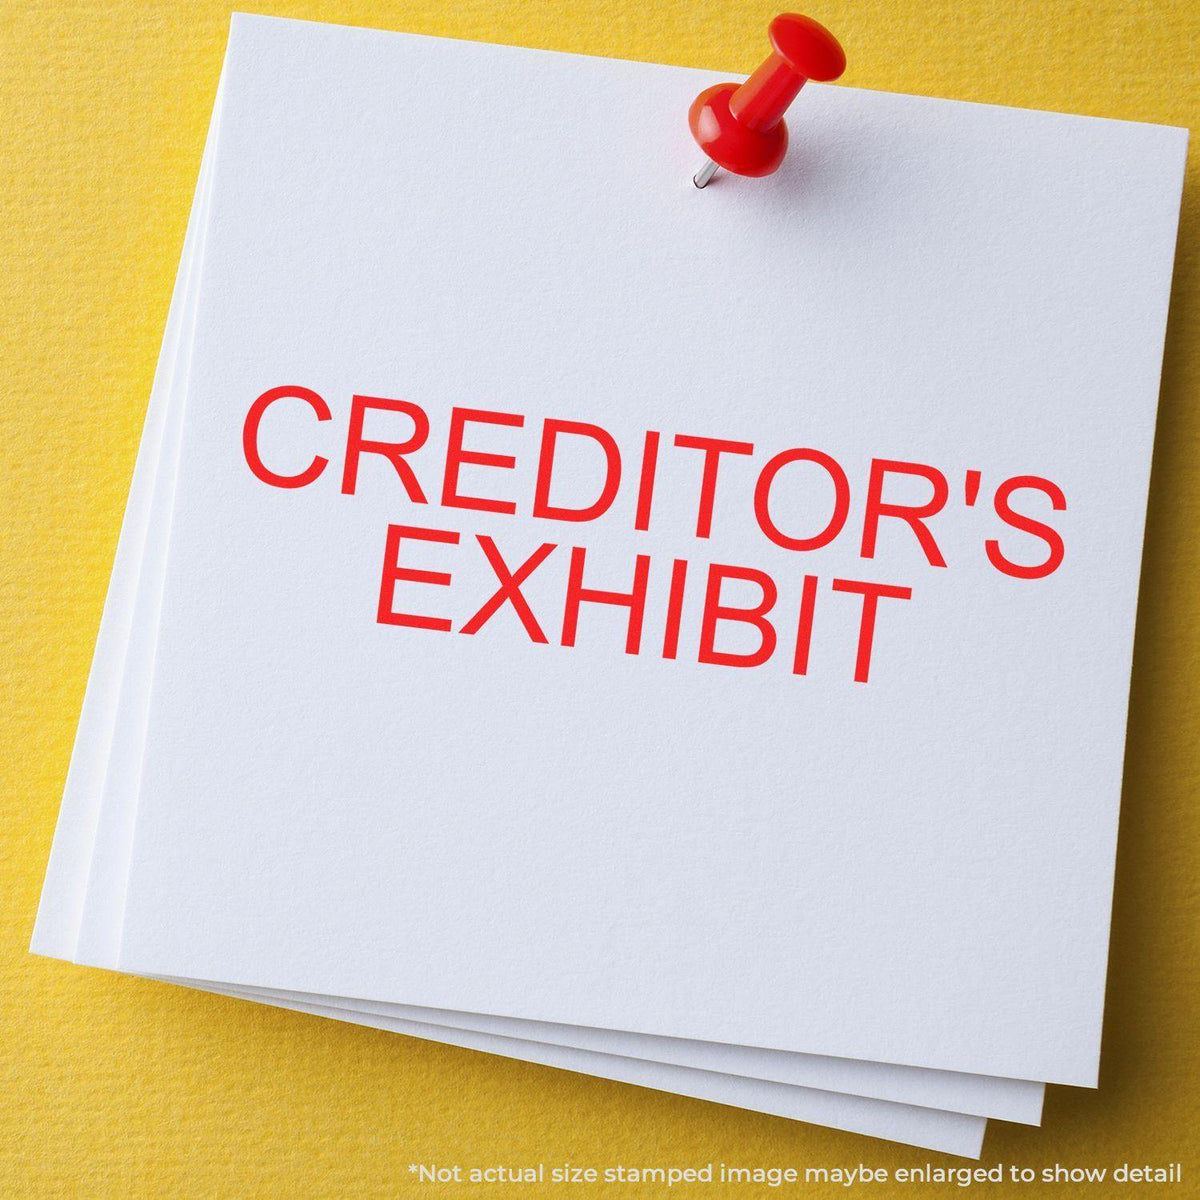 Creditors Exhibit Rubber Stamp In Use Photo